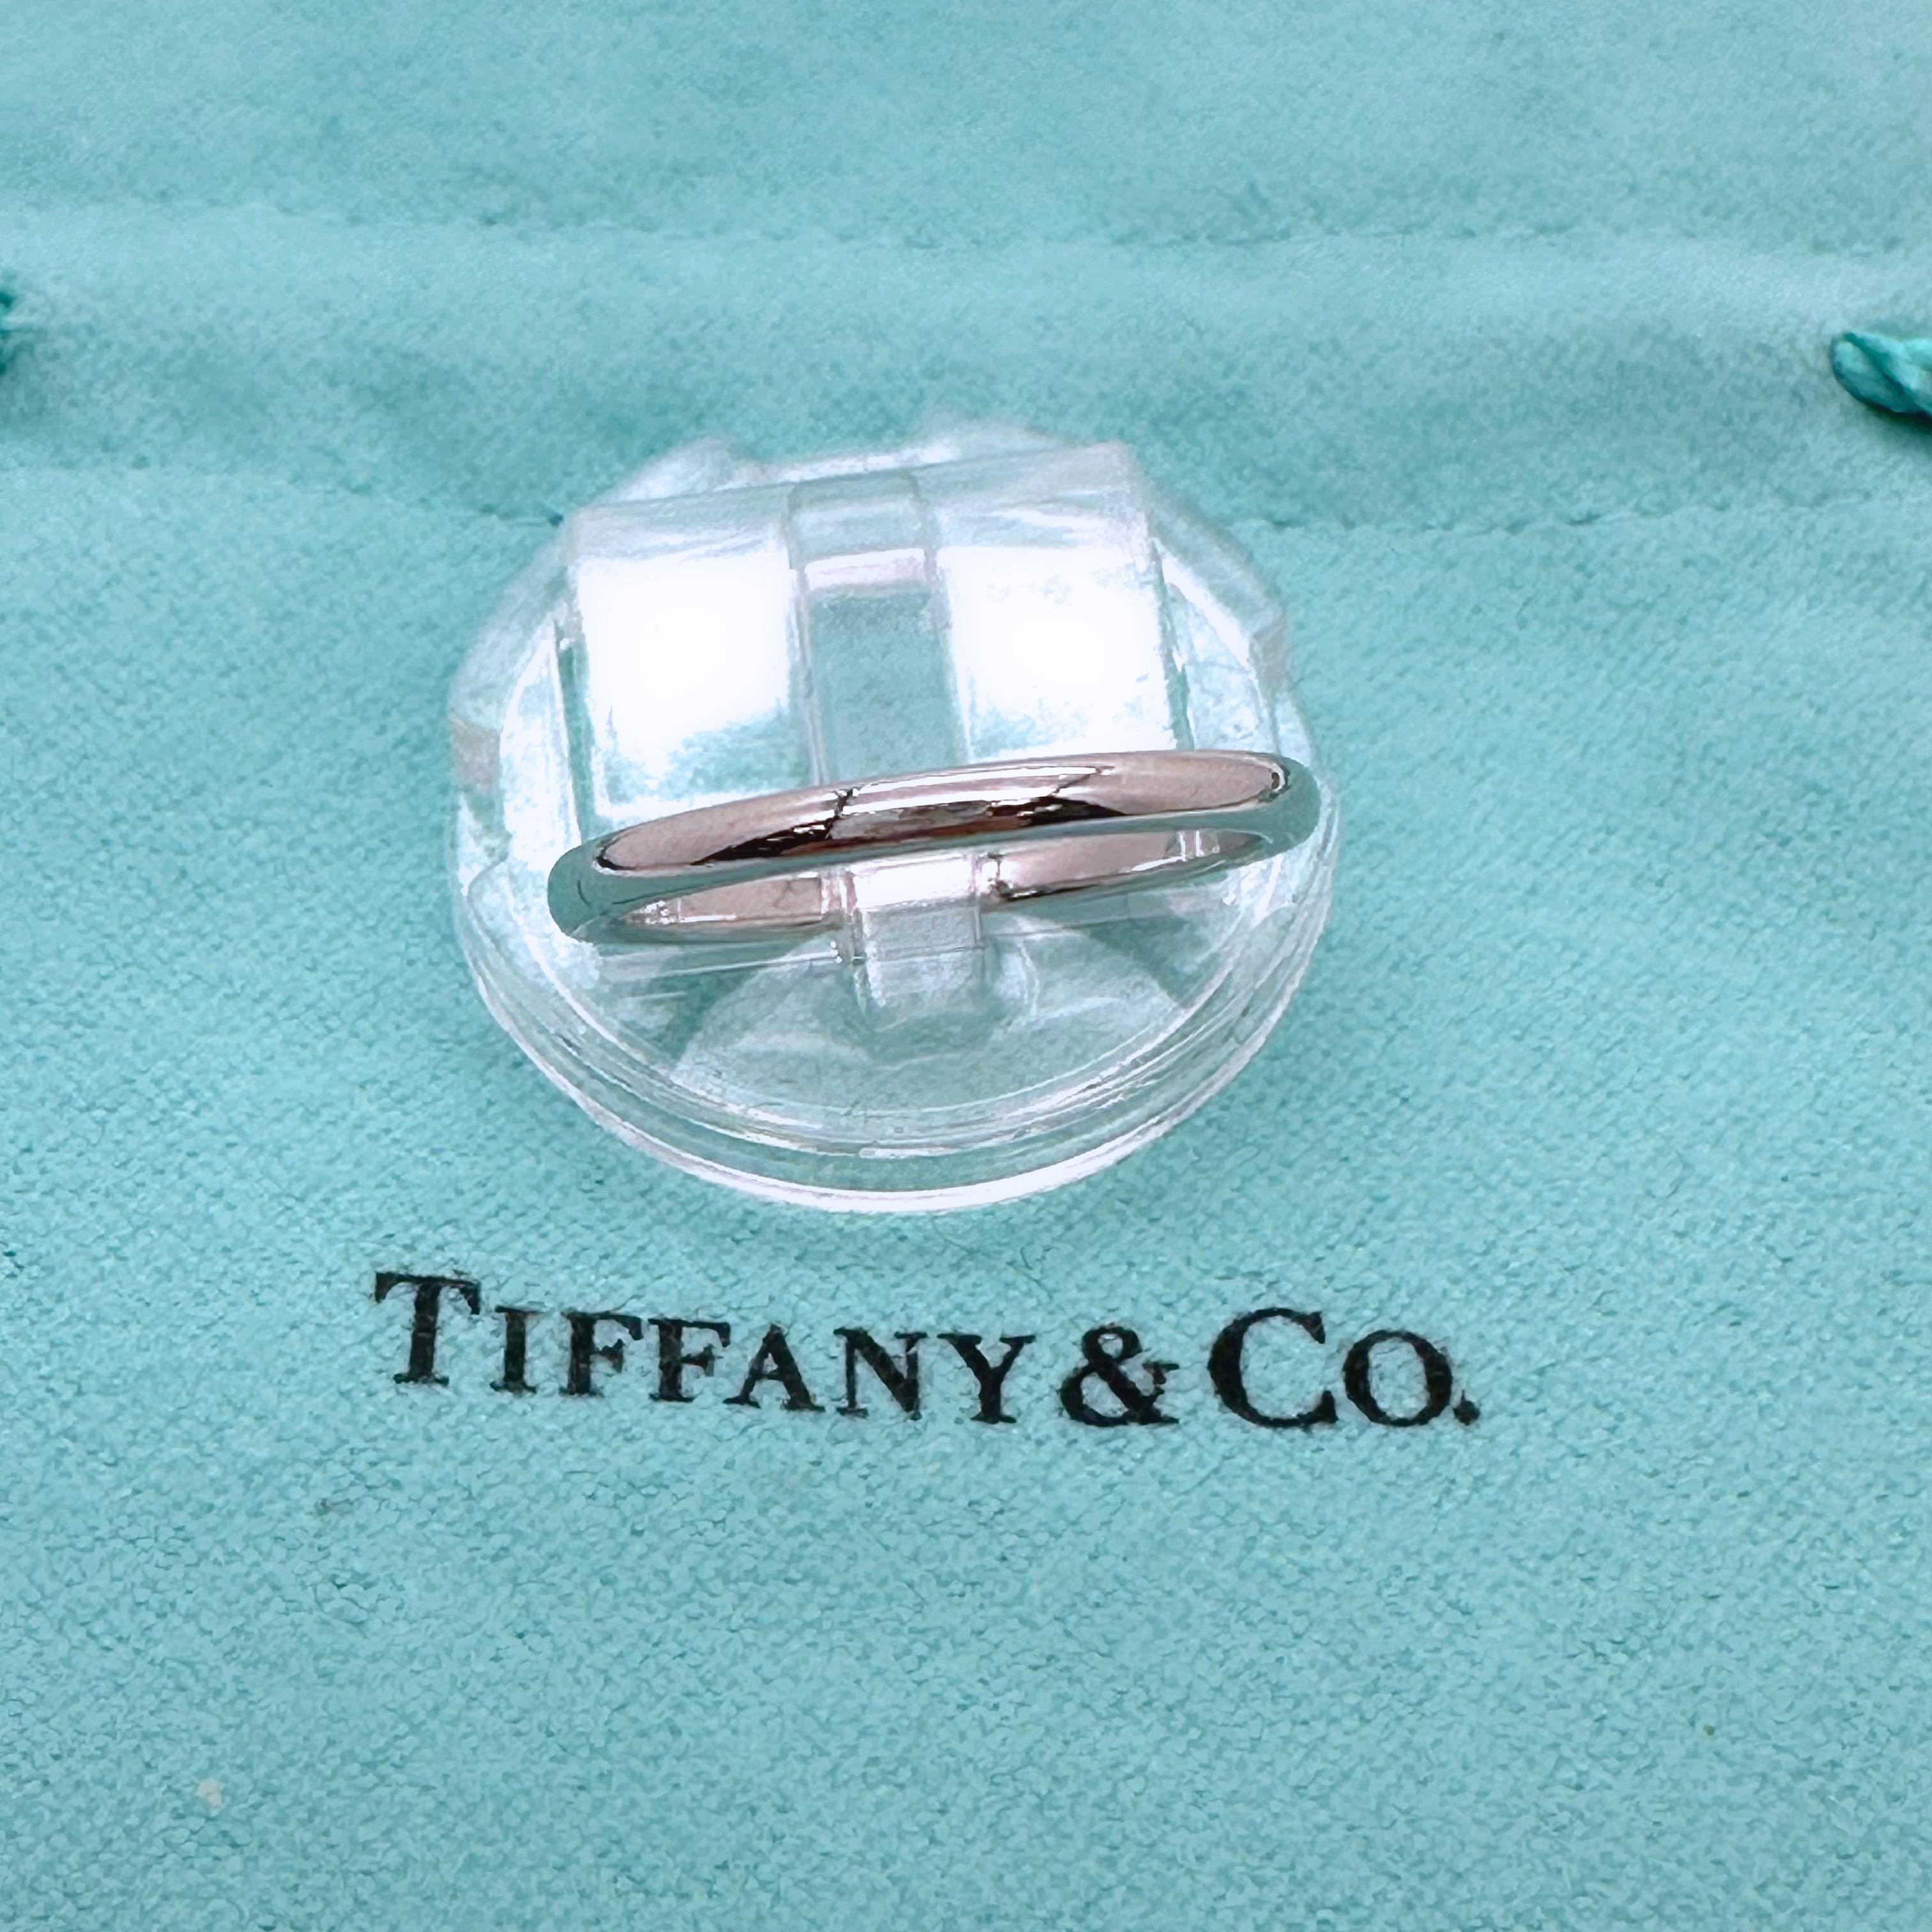 Tiffany & Co. Forever Wedding Band Ring 
Style:  Band
Ref. number:  60001623
Metal:  Platinum PT950
Size / Measurements:  6.5 sizable
Width:   2 mm
Hallmark:  TIFFANY&CO. PT950
Includes:  T&C Jewelry Pouch
Retail:  $ 950.00
Sku##1420TCH021424-6.5